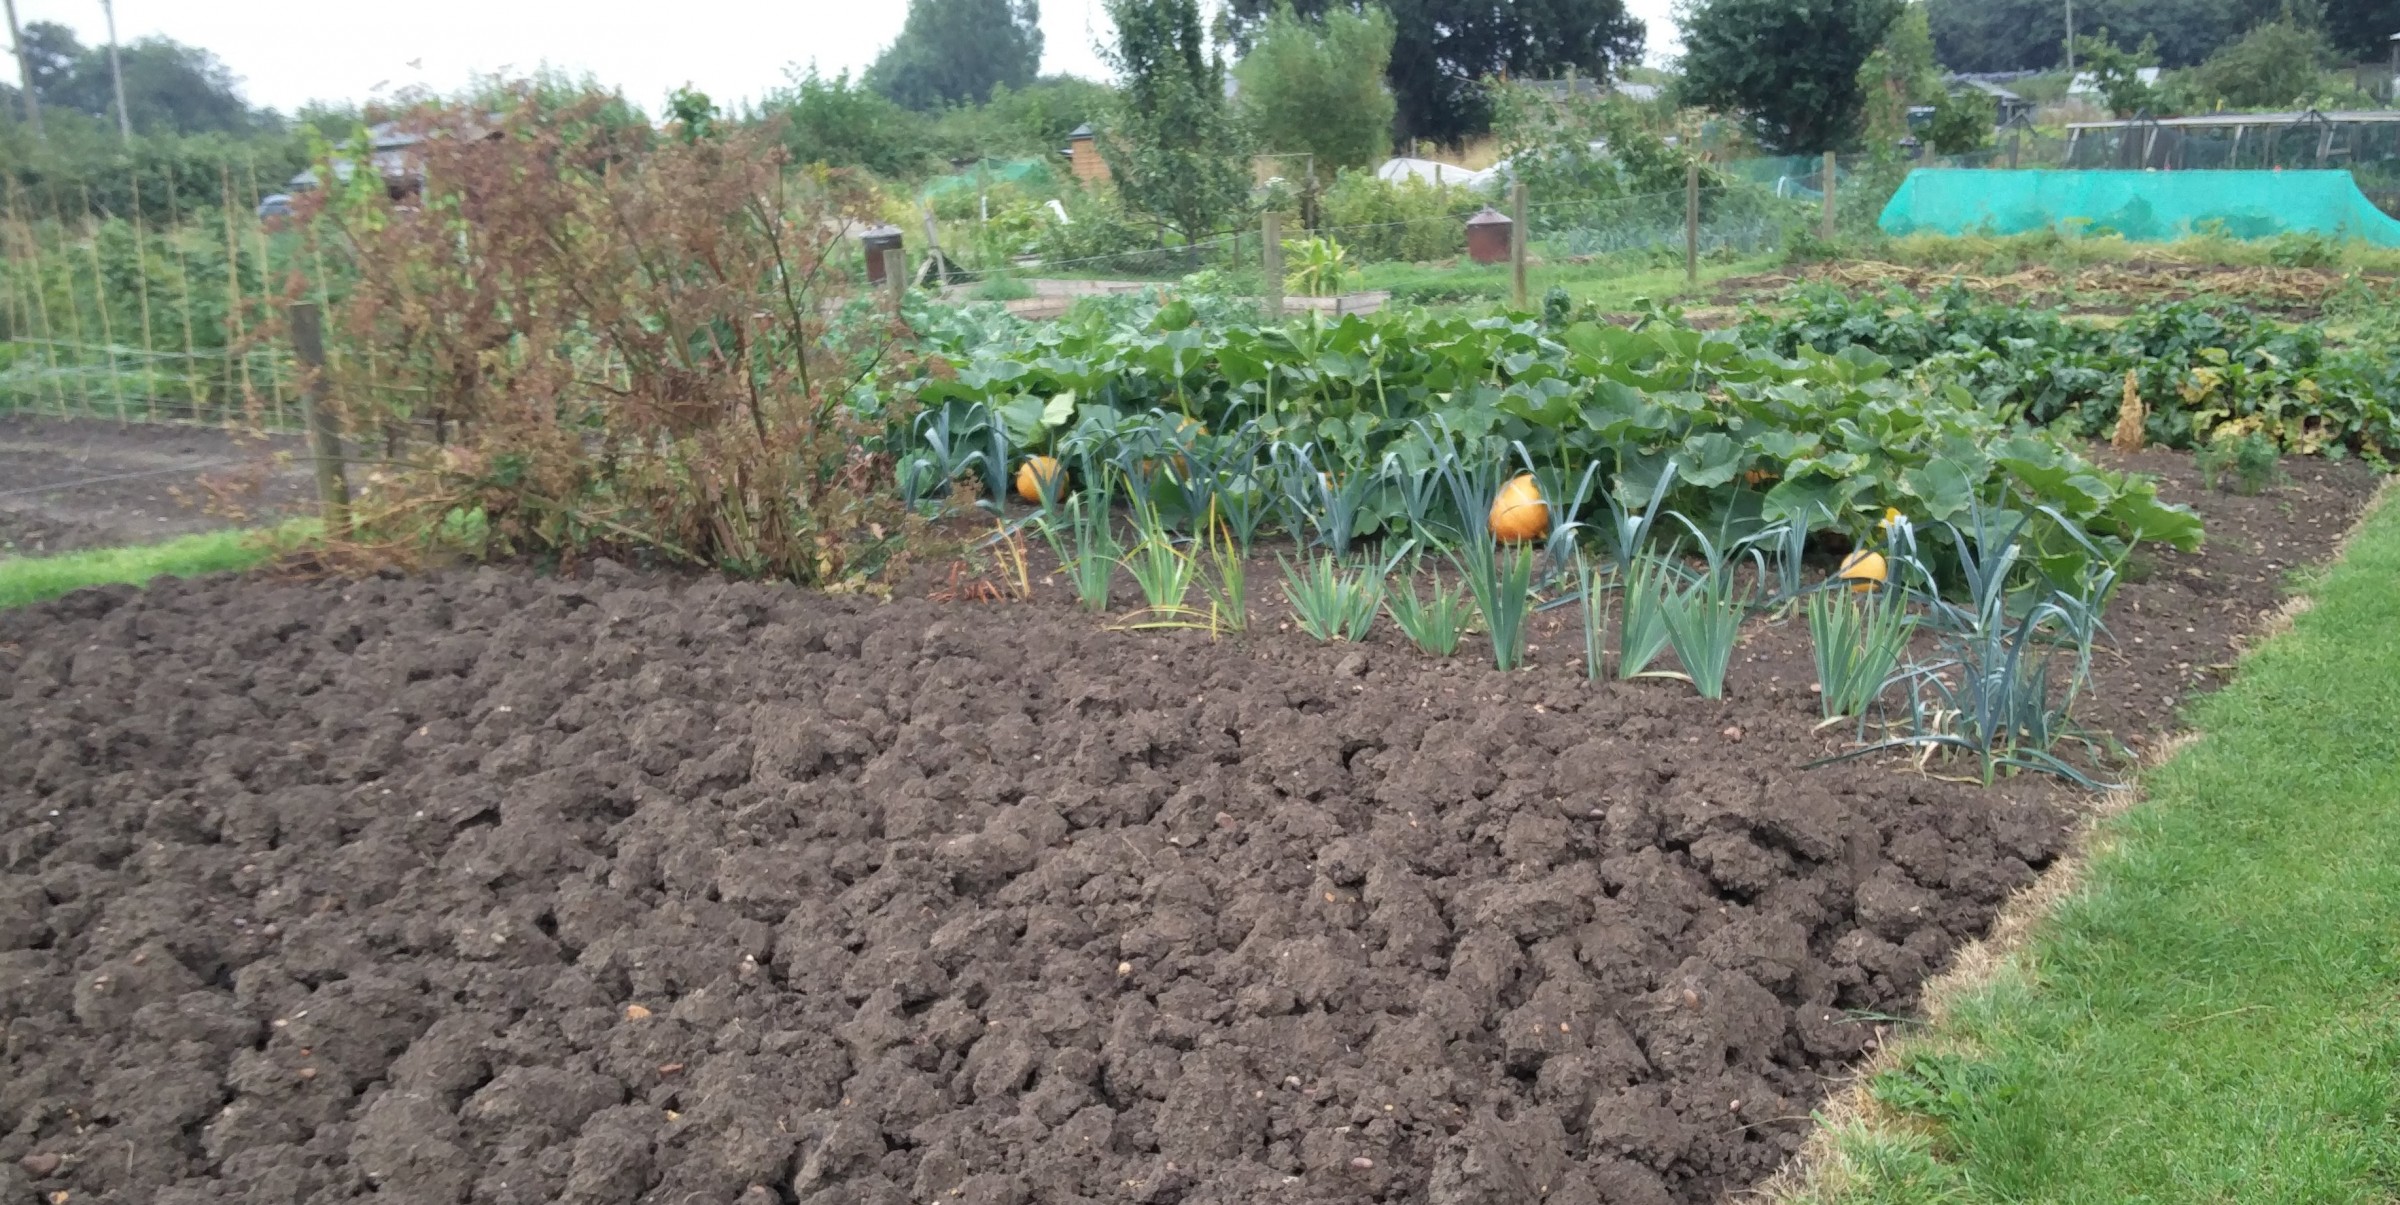 Example vegetable garden using the one large vegetable bed system